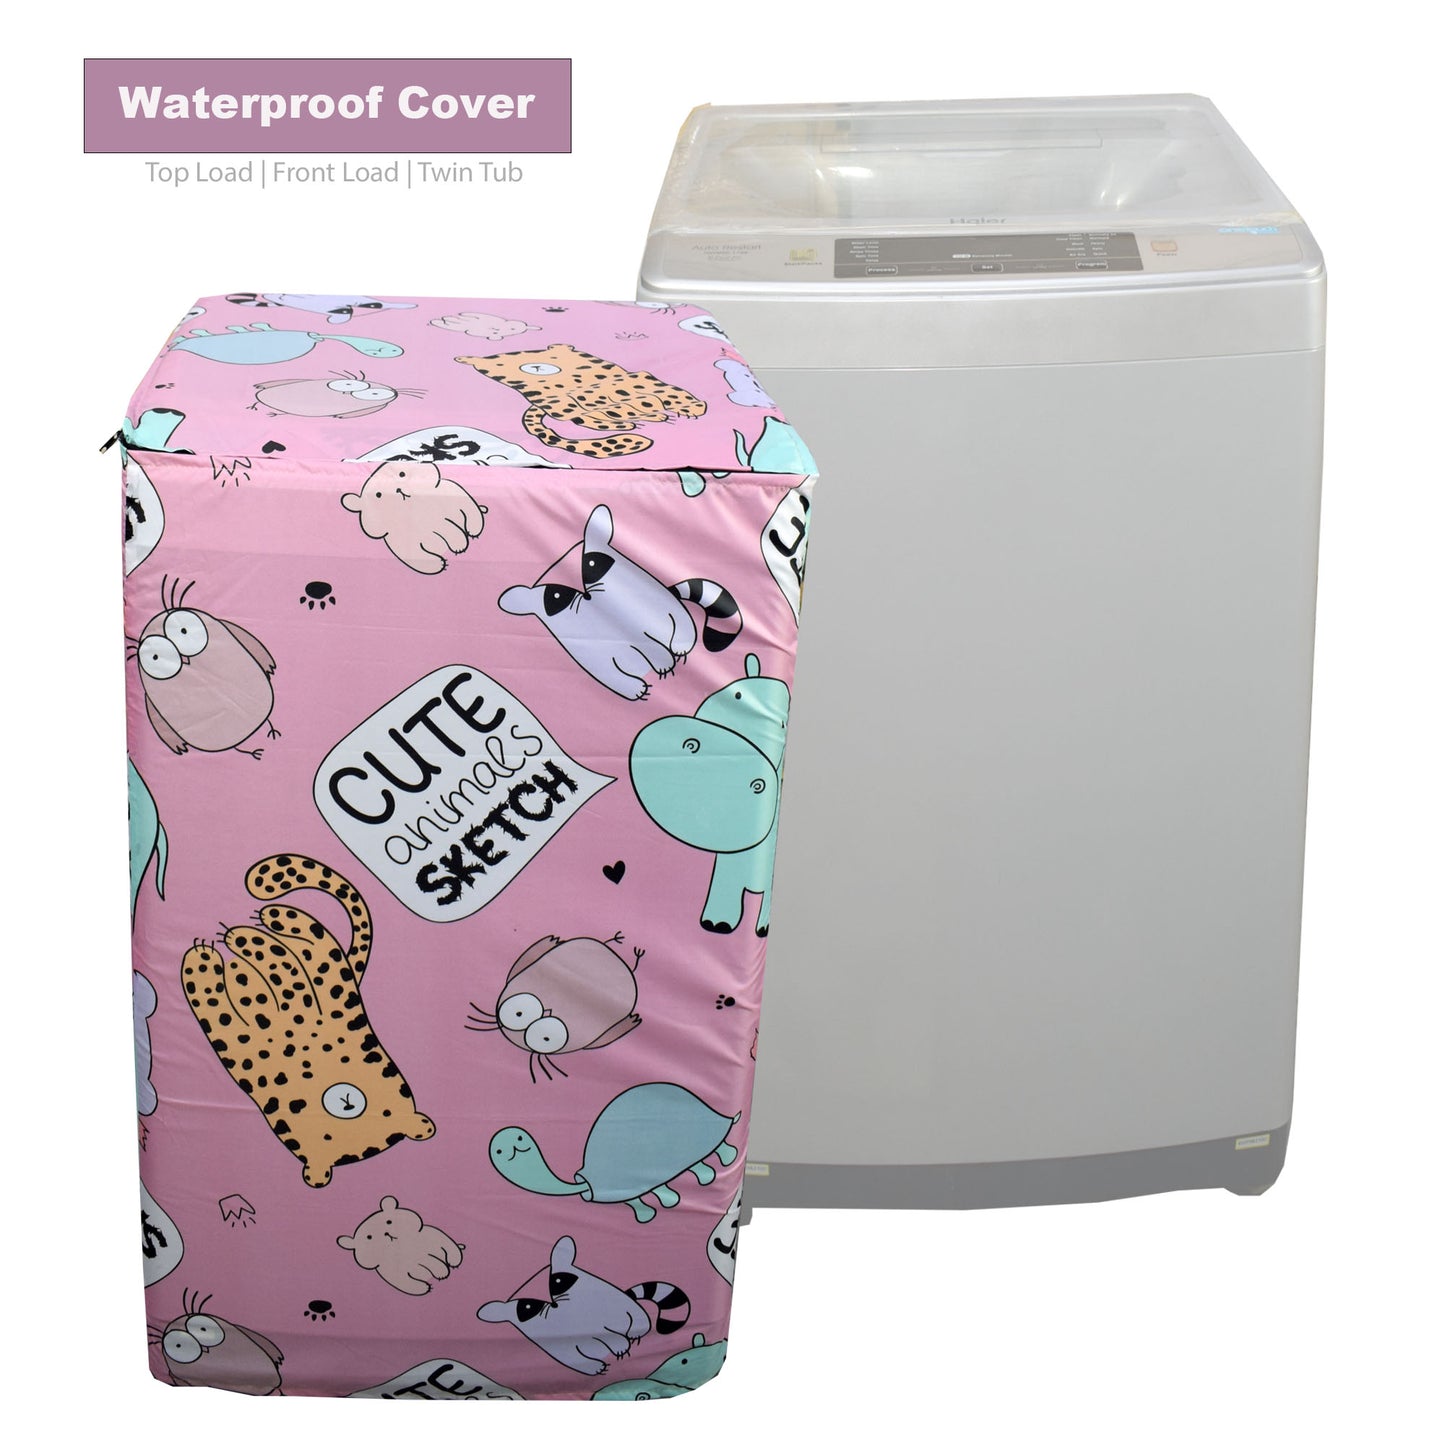 Best Waterproof Washing Machine Cover Pink for Top Load & Front Load in Pakistan